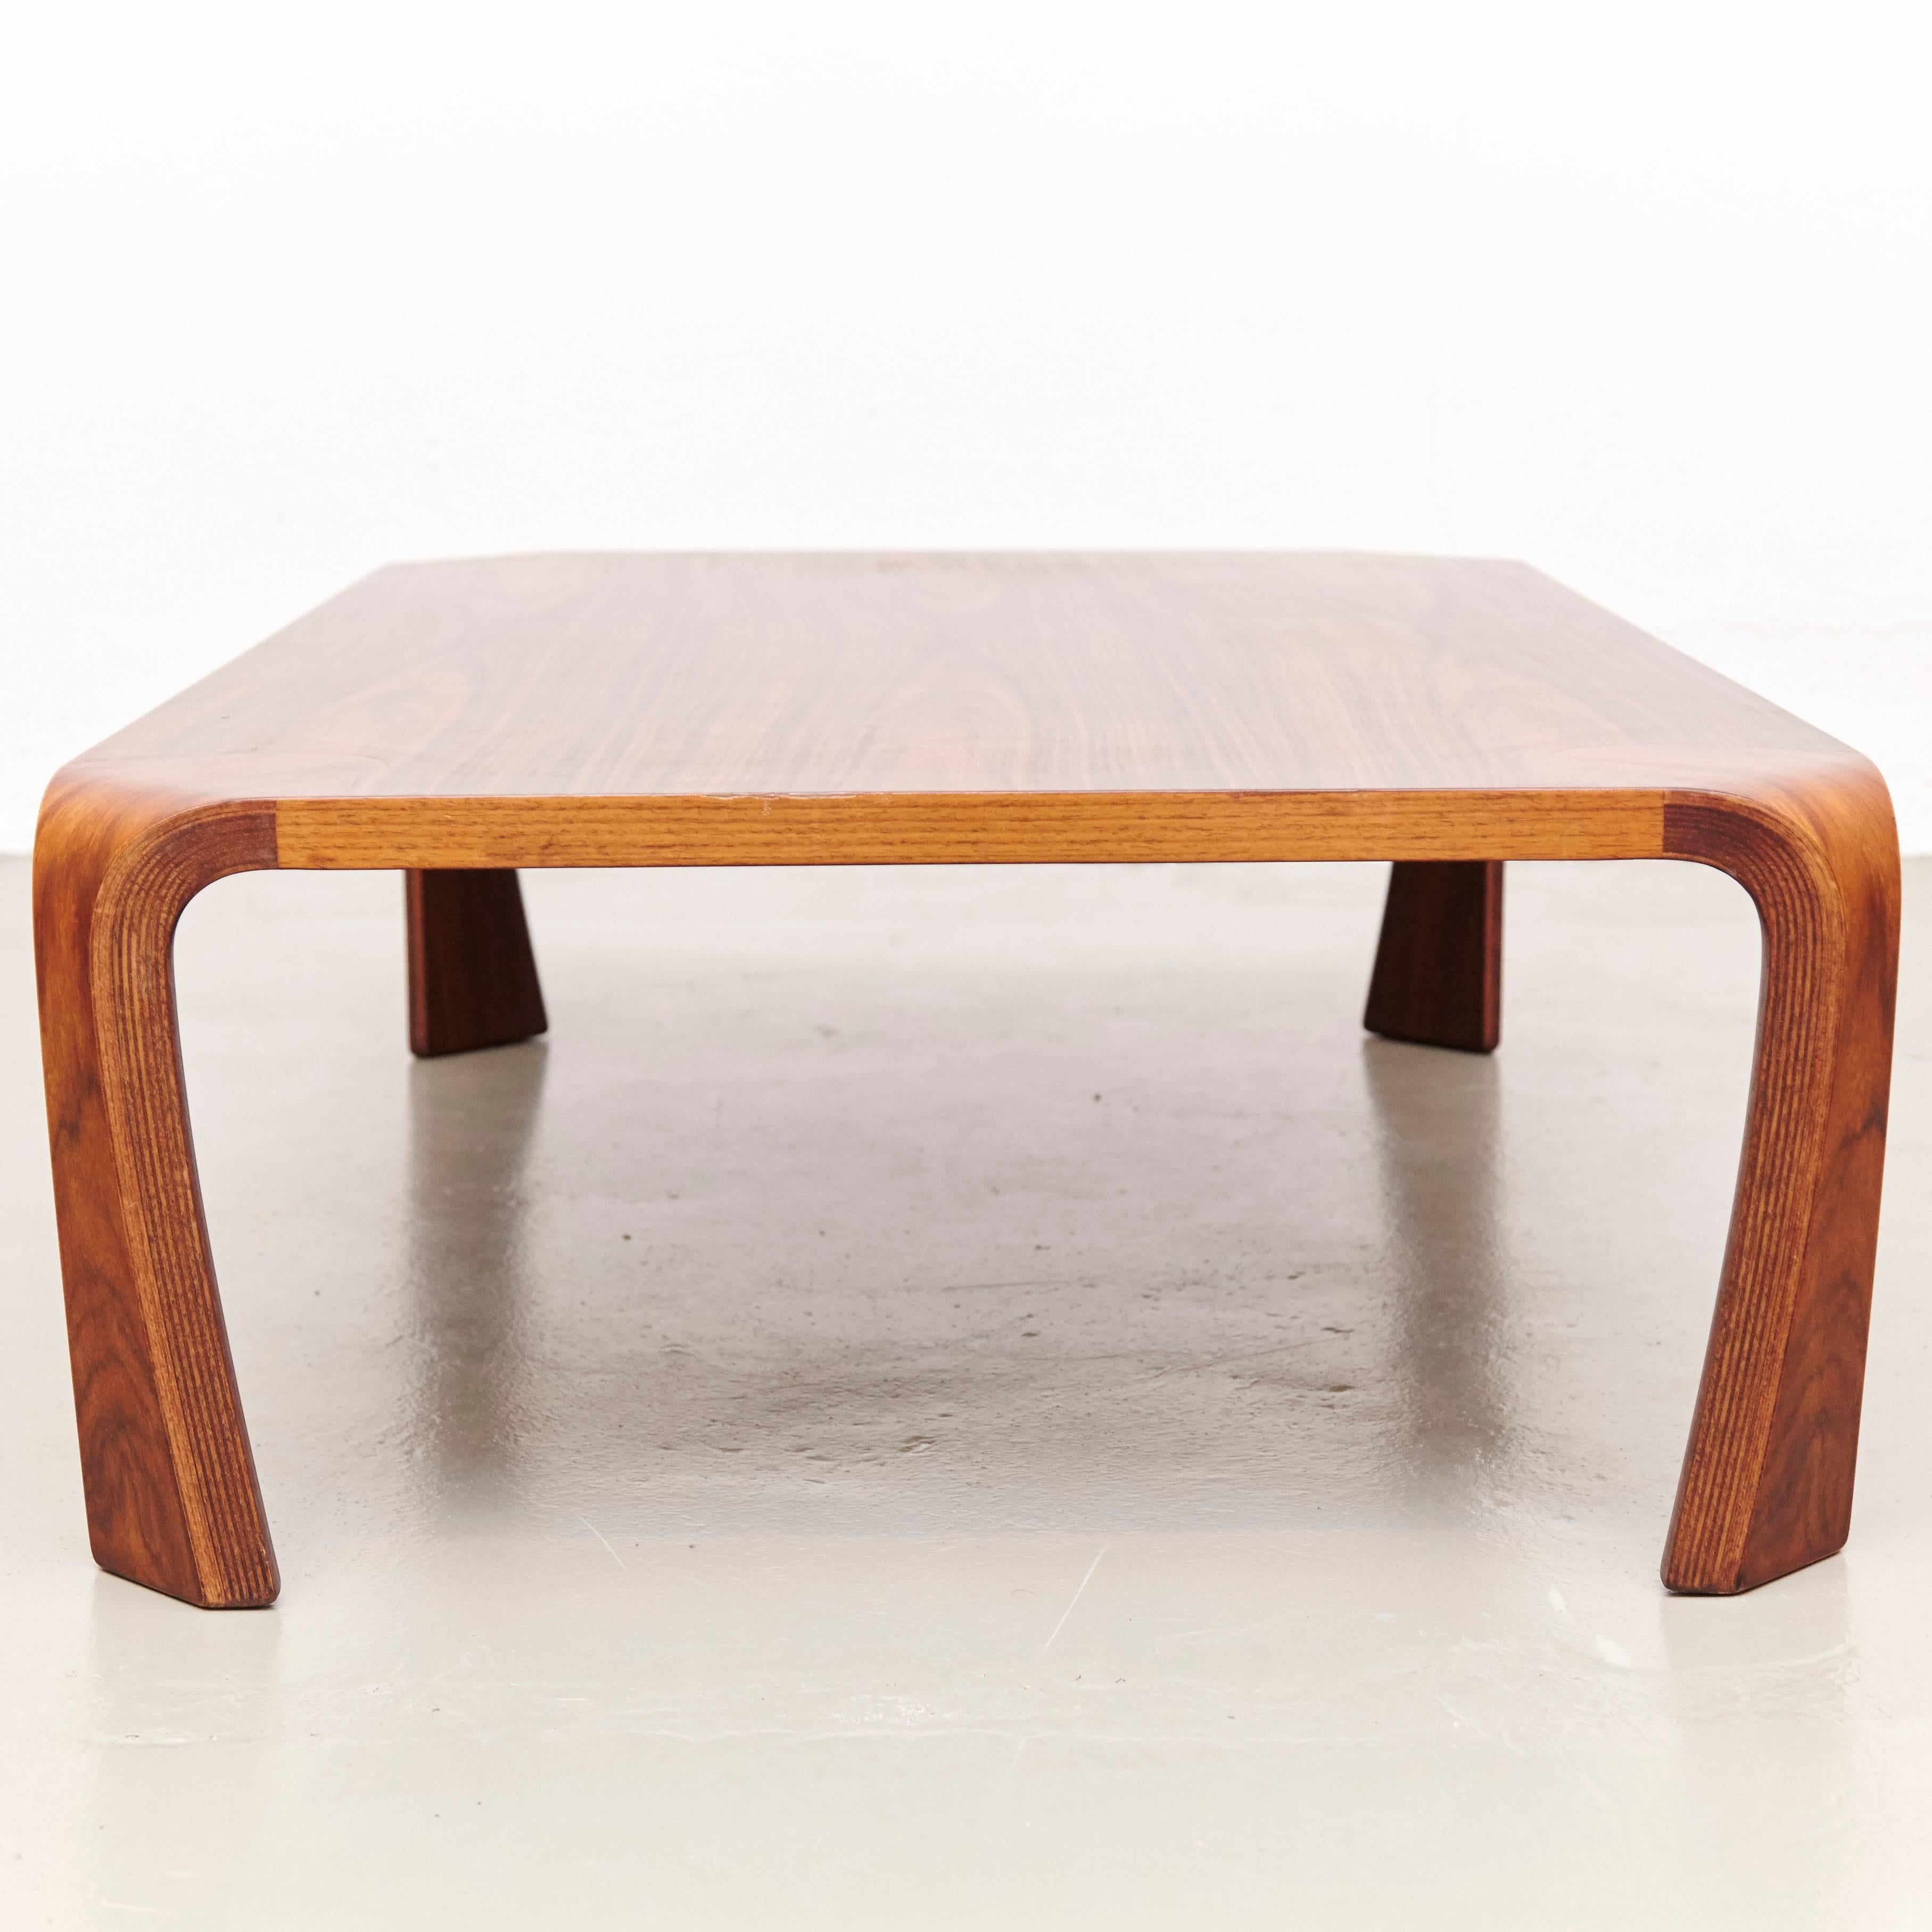 Stunning coffee table in bent rosewood, designed by Saburo Inui, manufactured by Tendo in Japan, 1960s.

In good original condition with minor wear consistent with age and use, preserving a beautiful patina.

 